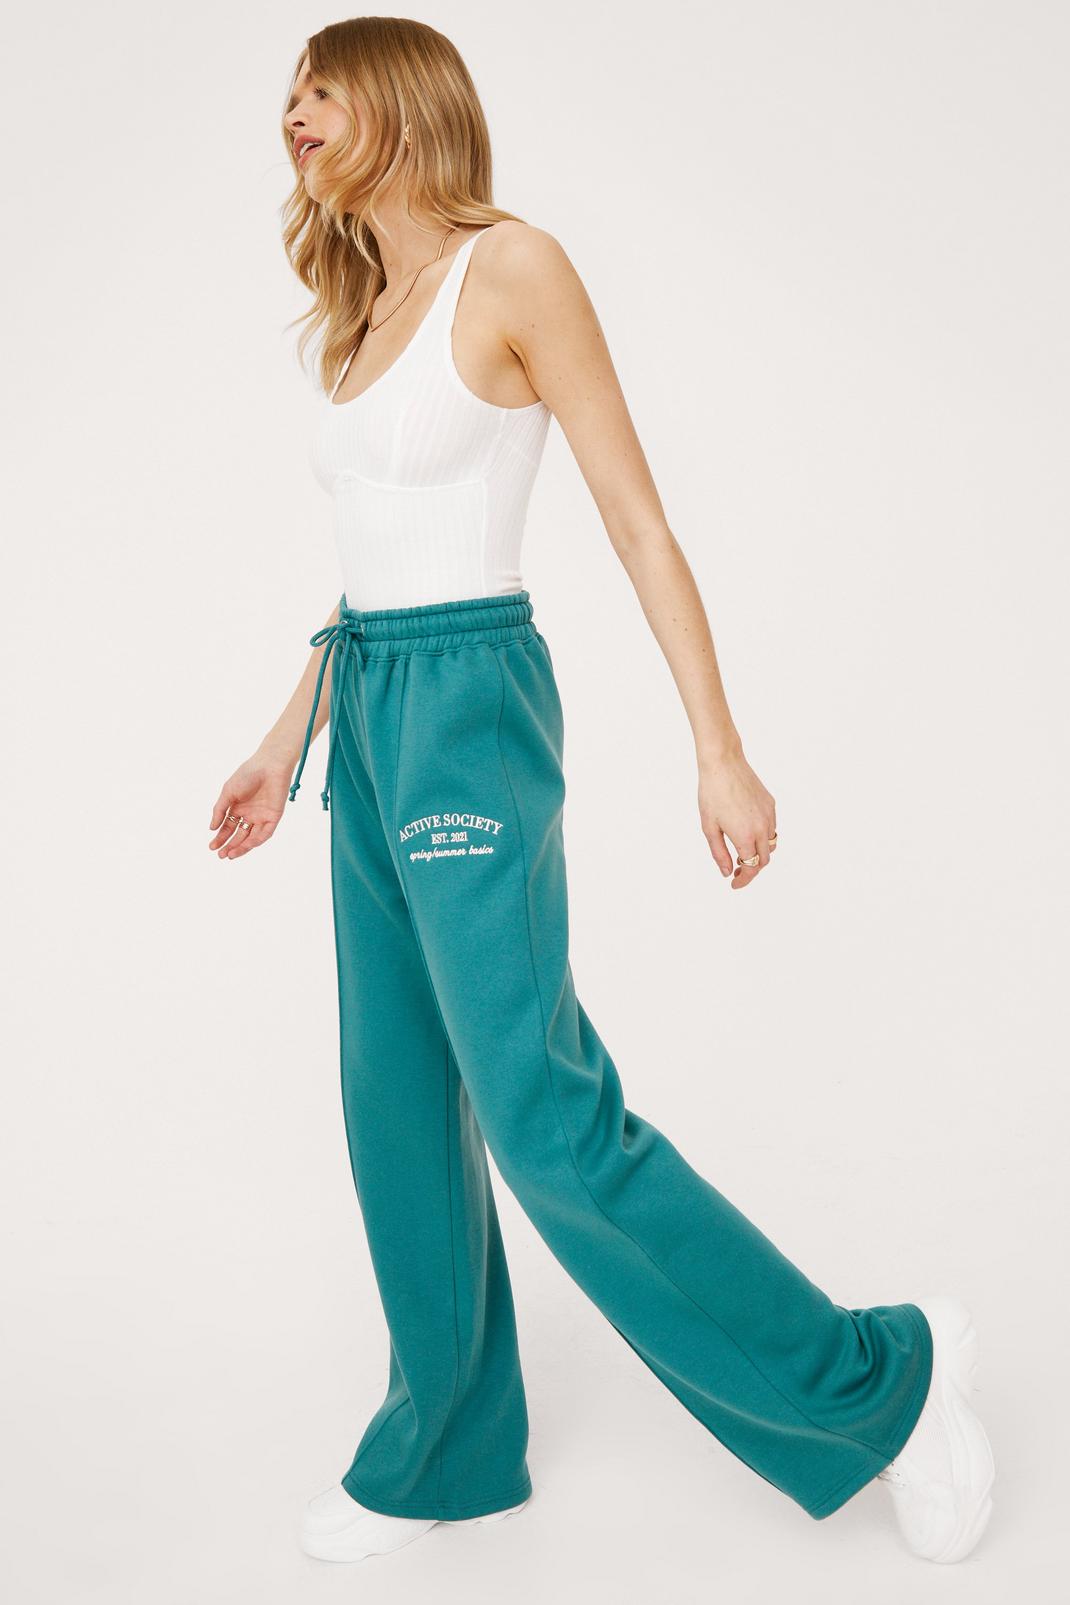 Teal Active Society Graphic Wide Leg Tracksuit Pants image number 1